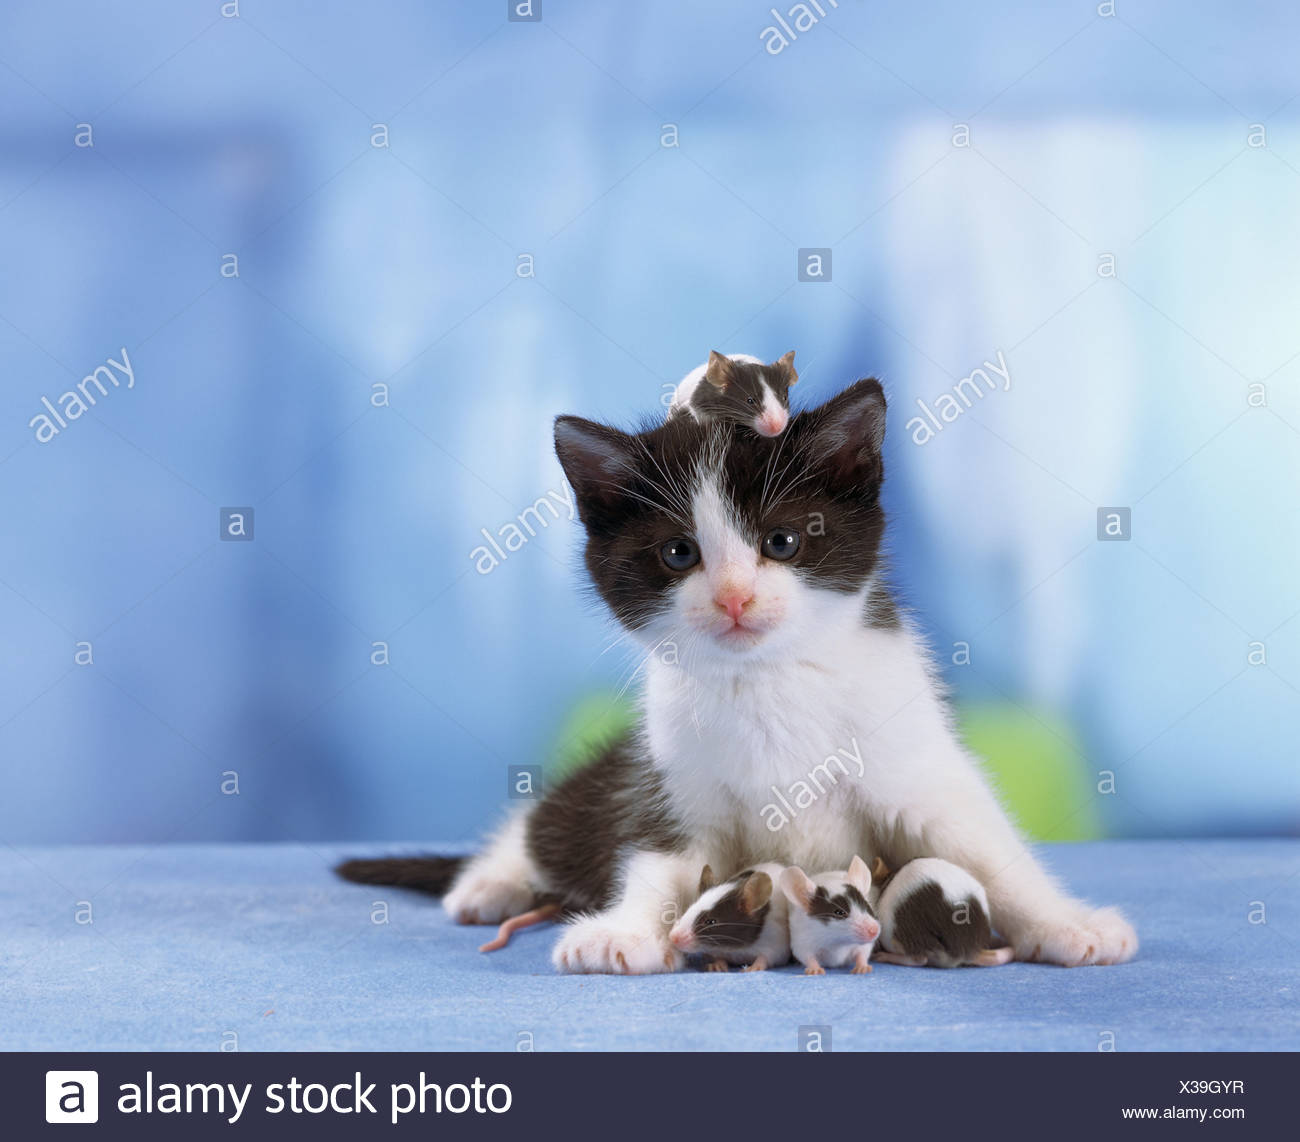 Animal Friendship Kitten With Mice One Mouse Sitting On Its Head Stock Photo Alamy